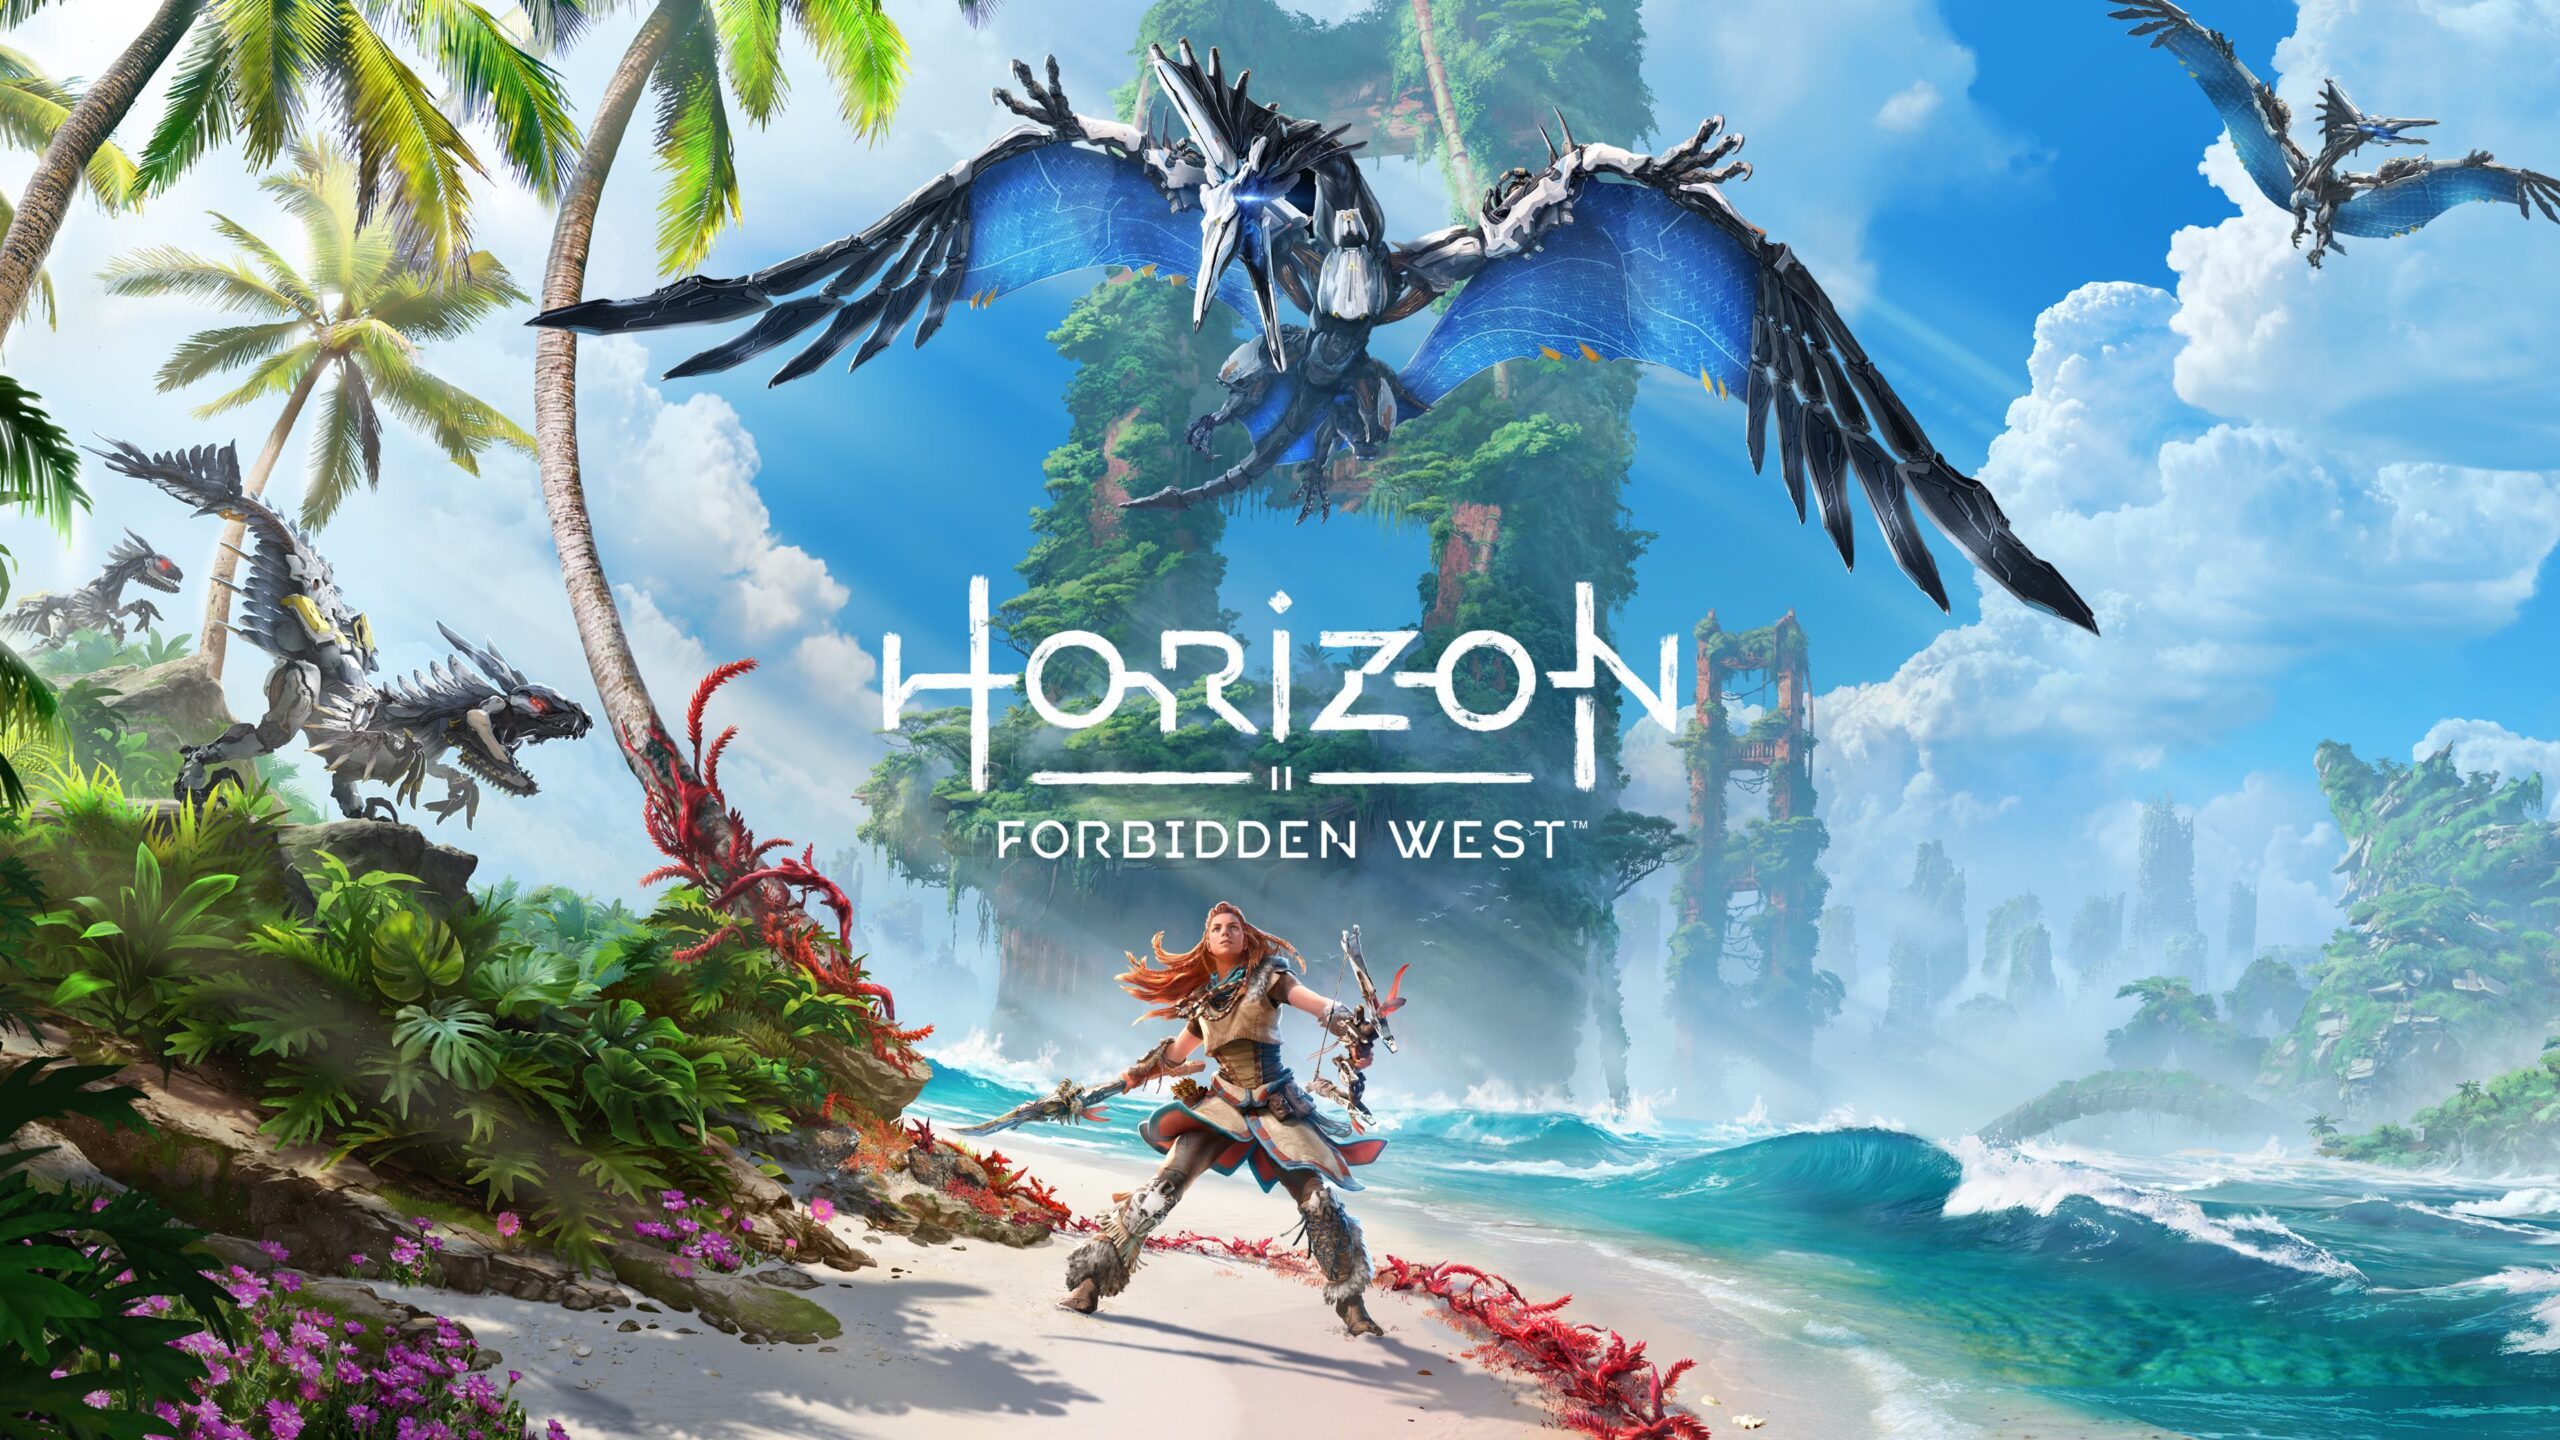 Summer Time Rendering Another Horizon Game to Launch on PS4